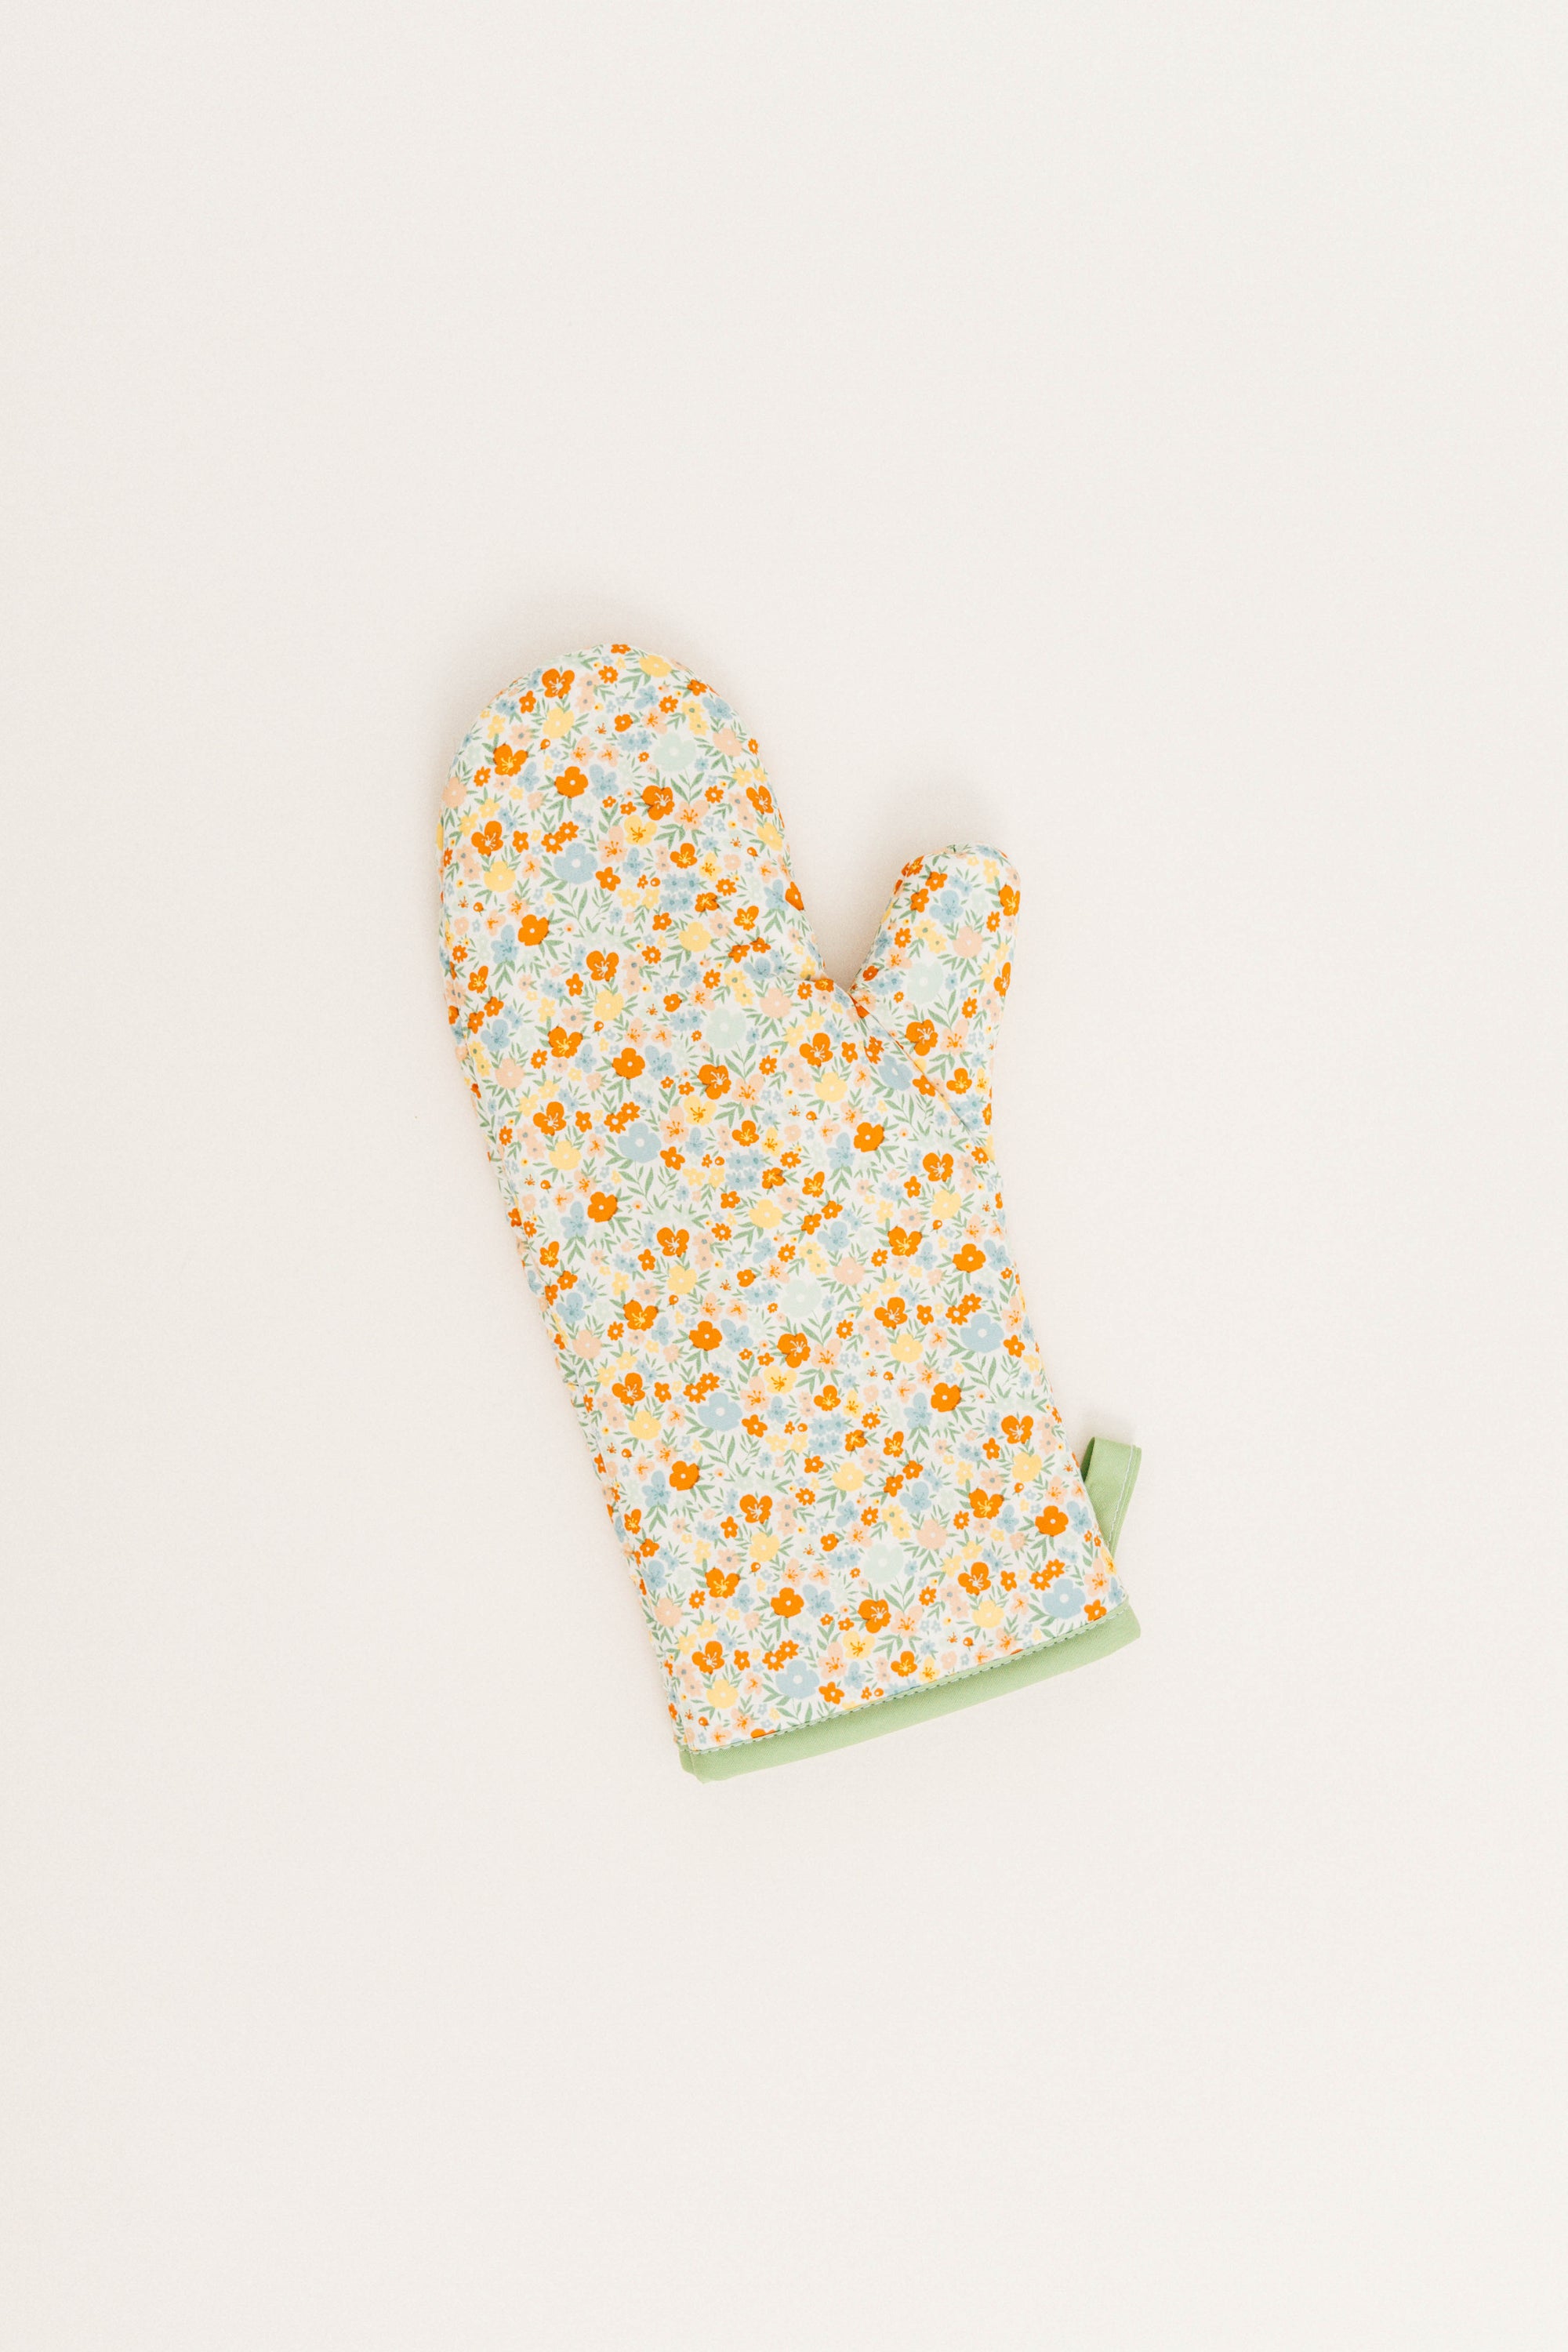 Floral Oven Mitts | Handmade Oven Mitt | Textile & Twine